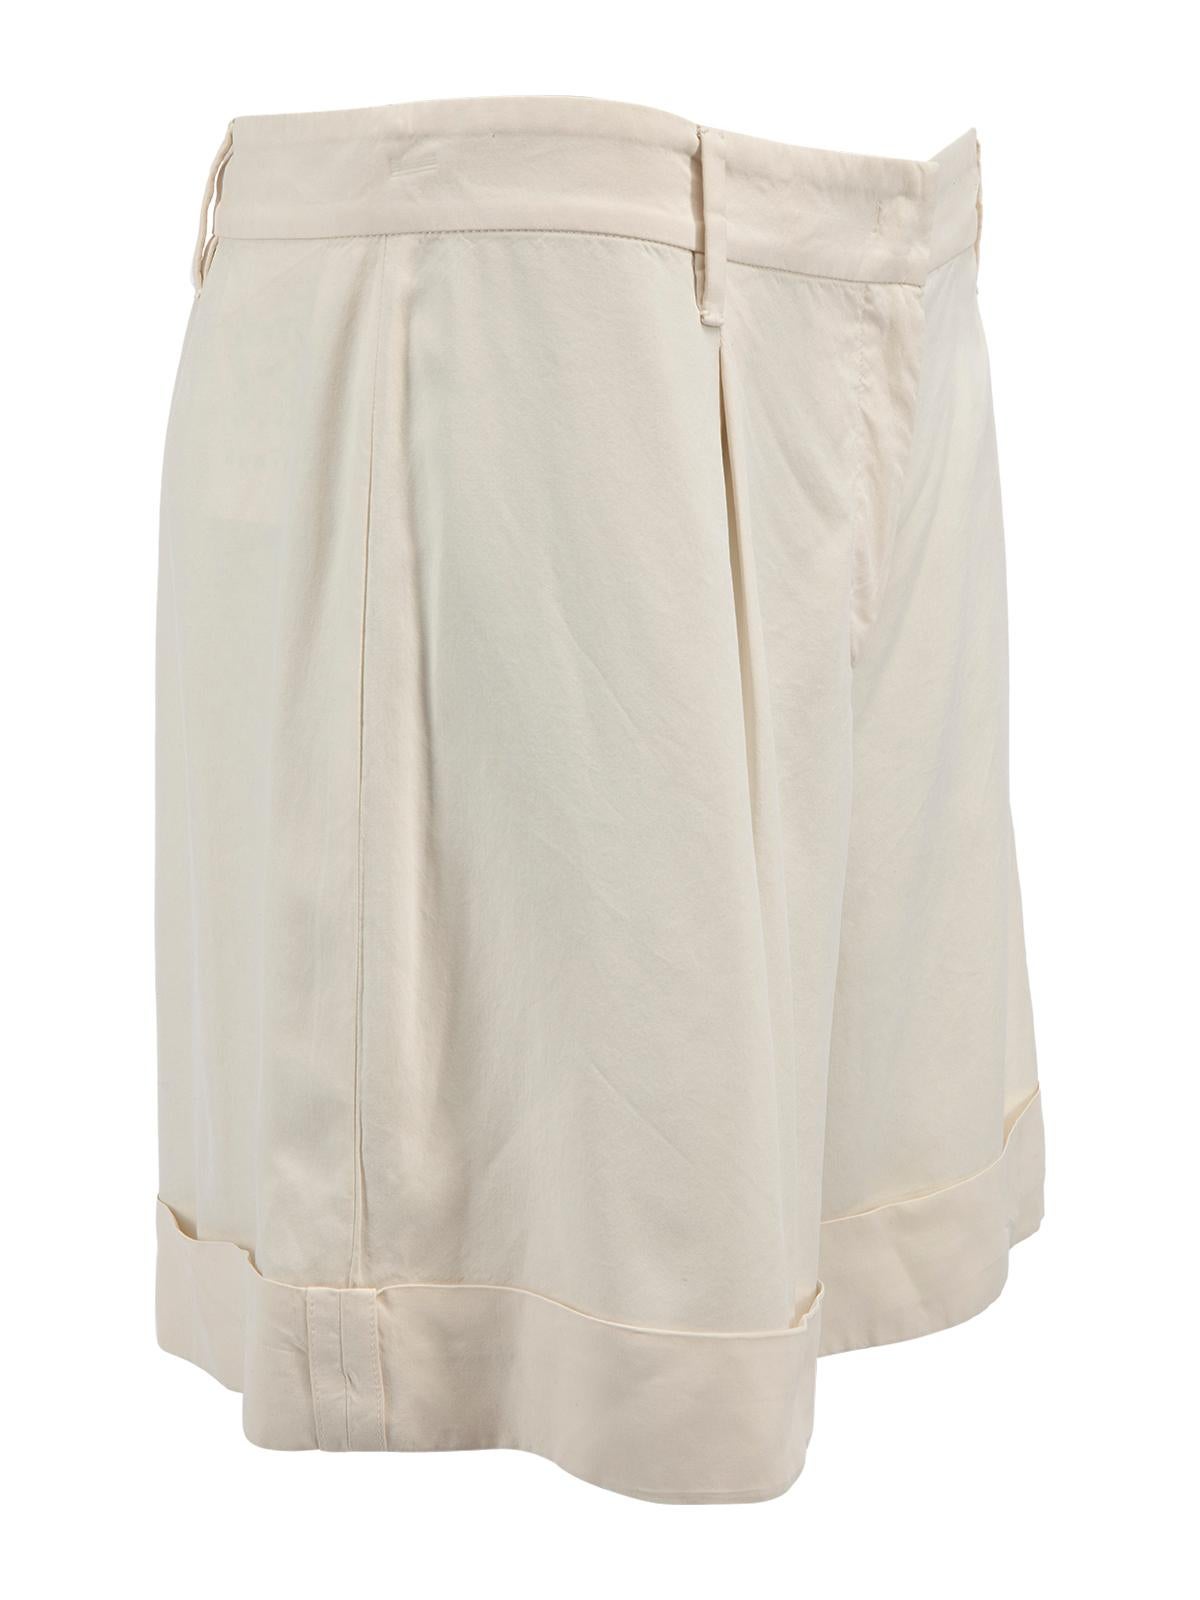 CONDITION is Very good. Hardly any visible wear to shorts is evident. A hardly visible stain to the waist band and a loose thread around the crotch area can be seen on this used Prada designer resale item. Details Cream Silk Shorts Mid rise Wide leg